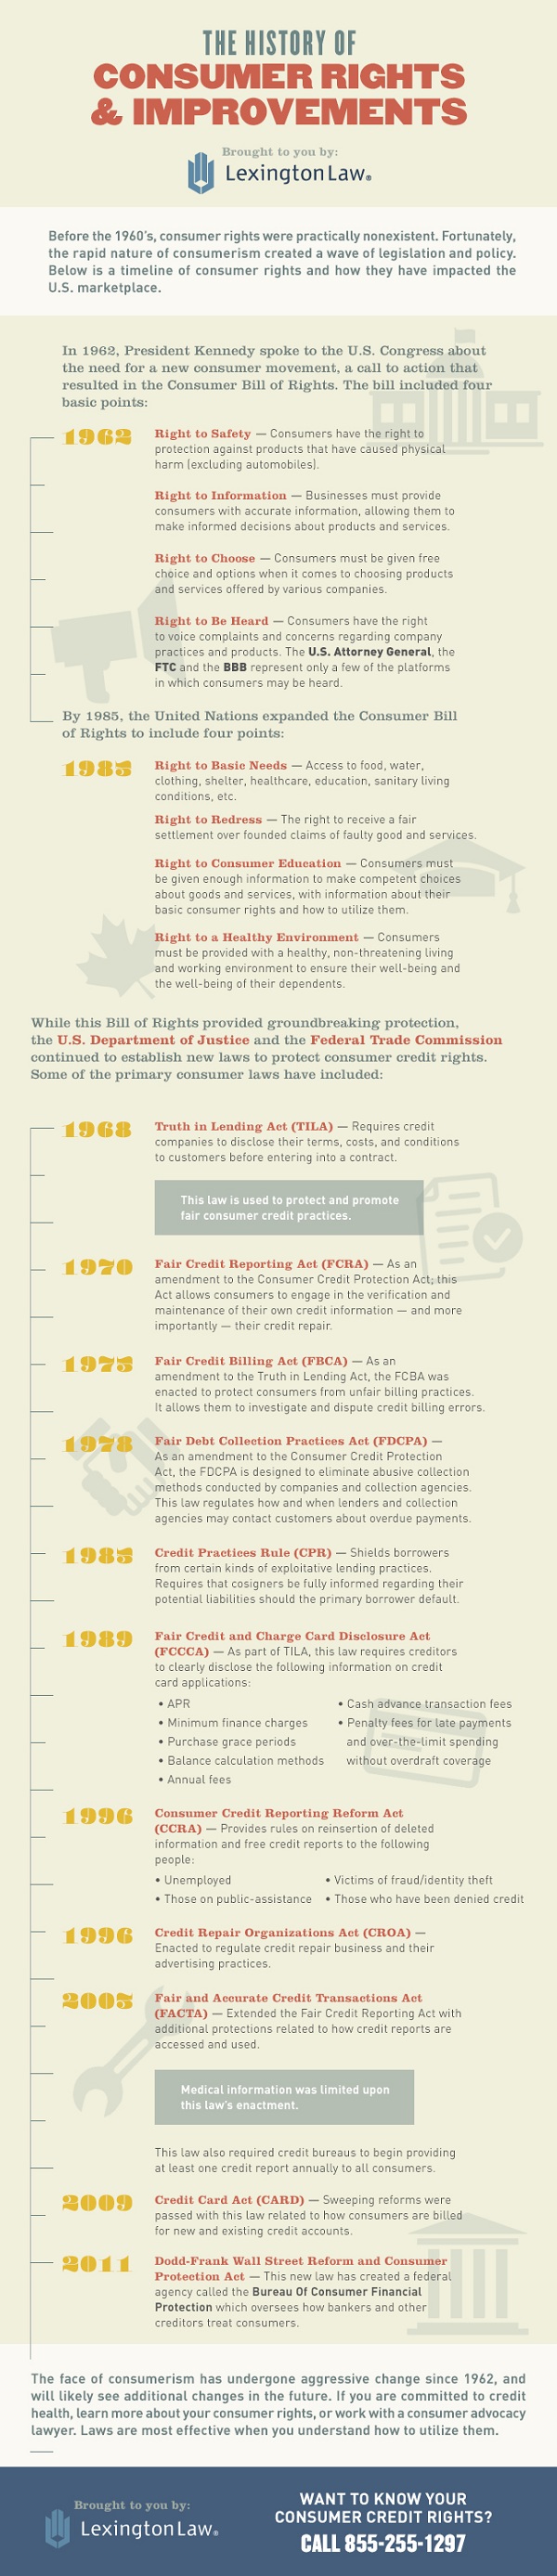 The-History-of-Consumer-Rights-And-Improvements.jpg